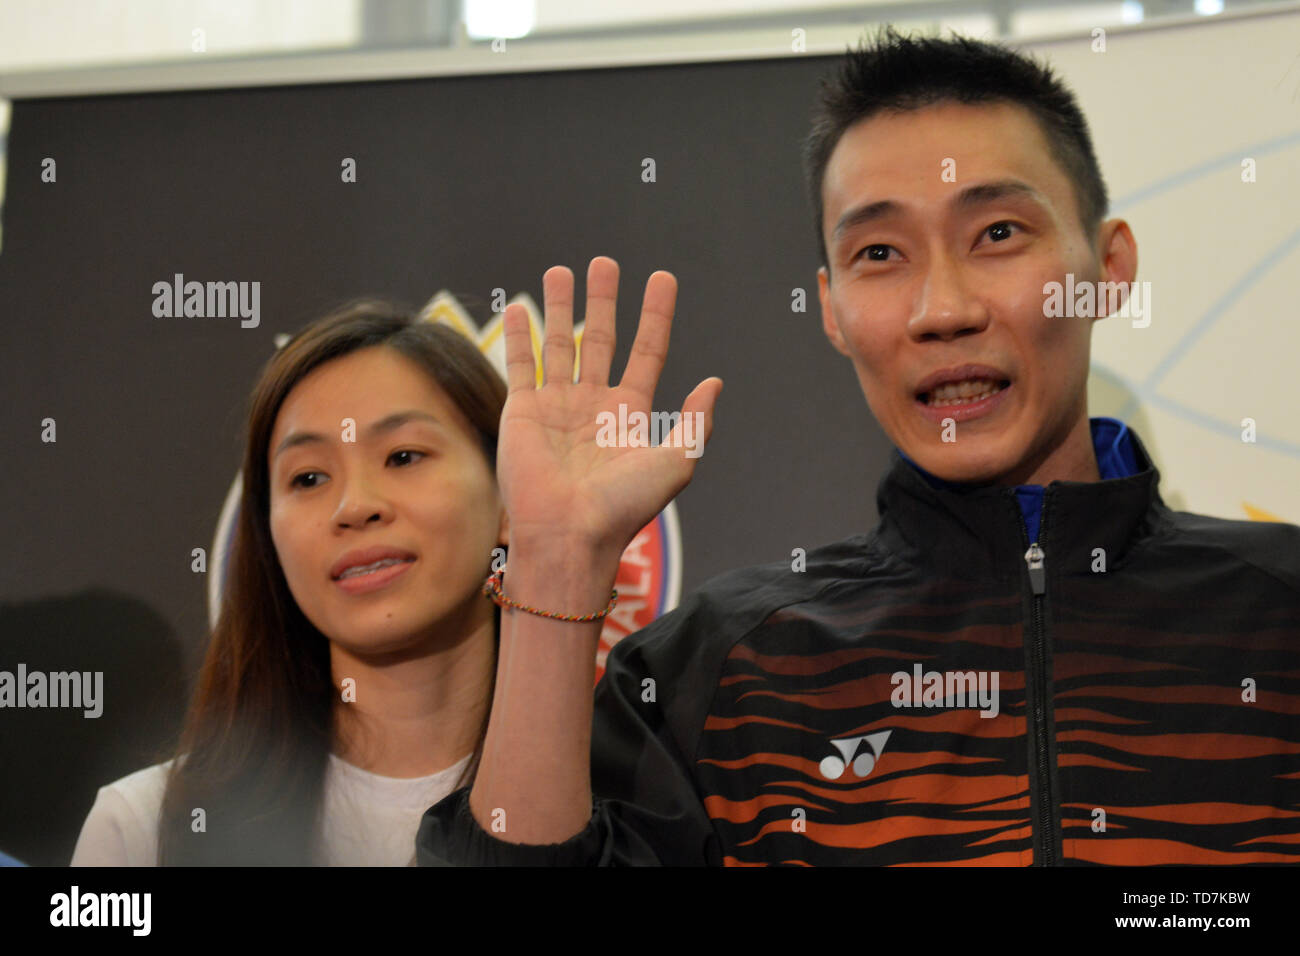 Putrajaya, Malaysia. 13th June, 2019. Malaysia's badminton player Lee Chong Wei (R) attends a news conference to announce his retirement in Putrajaya, Malaysia, June 13, 2019. Credit: Chong Voon Chung/Xinhua/Alamy Live News Stock Photo